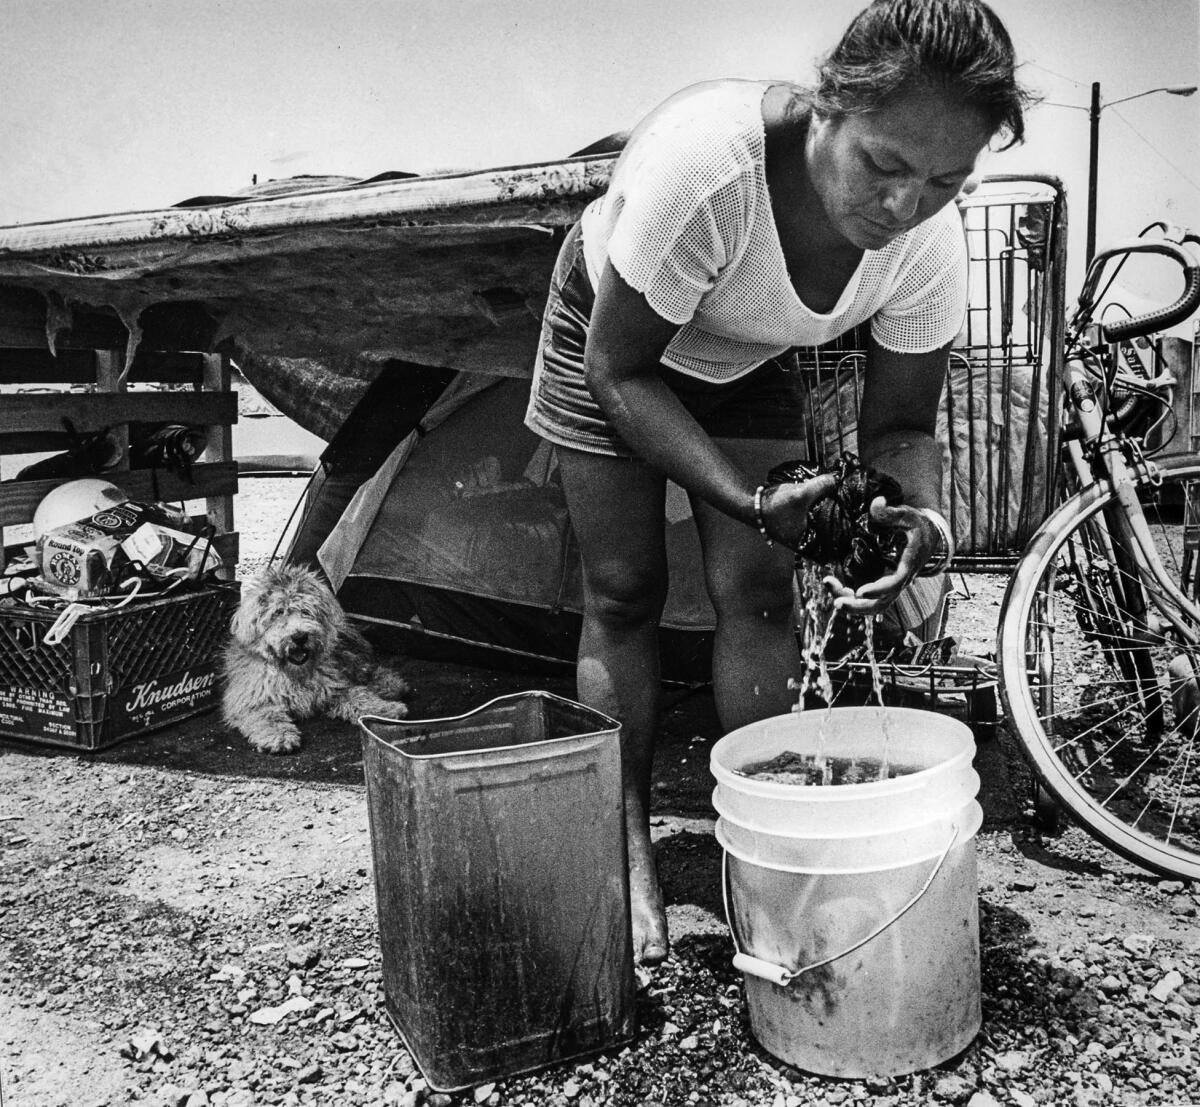 June 26, 1987: Esperanza Huerta washes clothes in front of tent while her dog Snowball takes it easy in the shade.